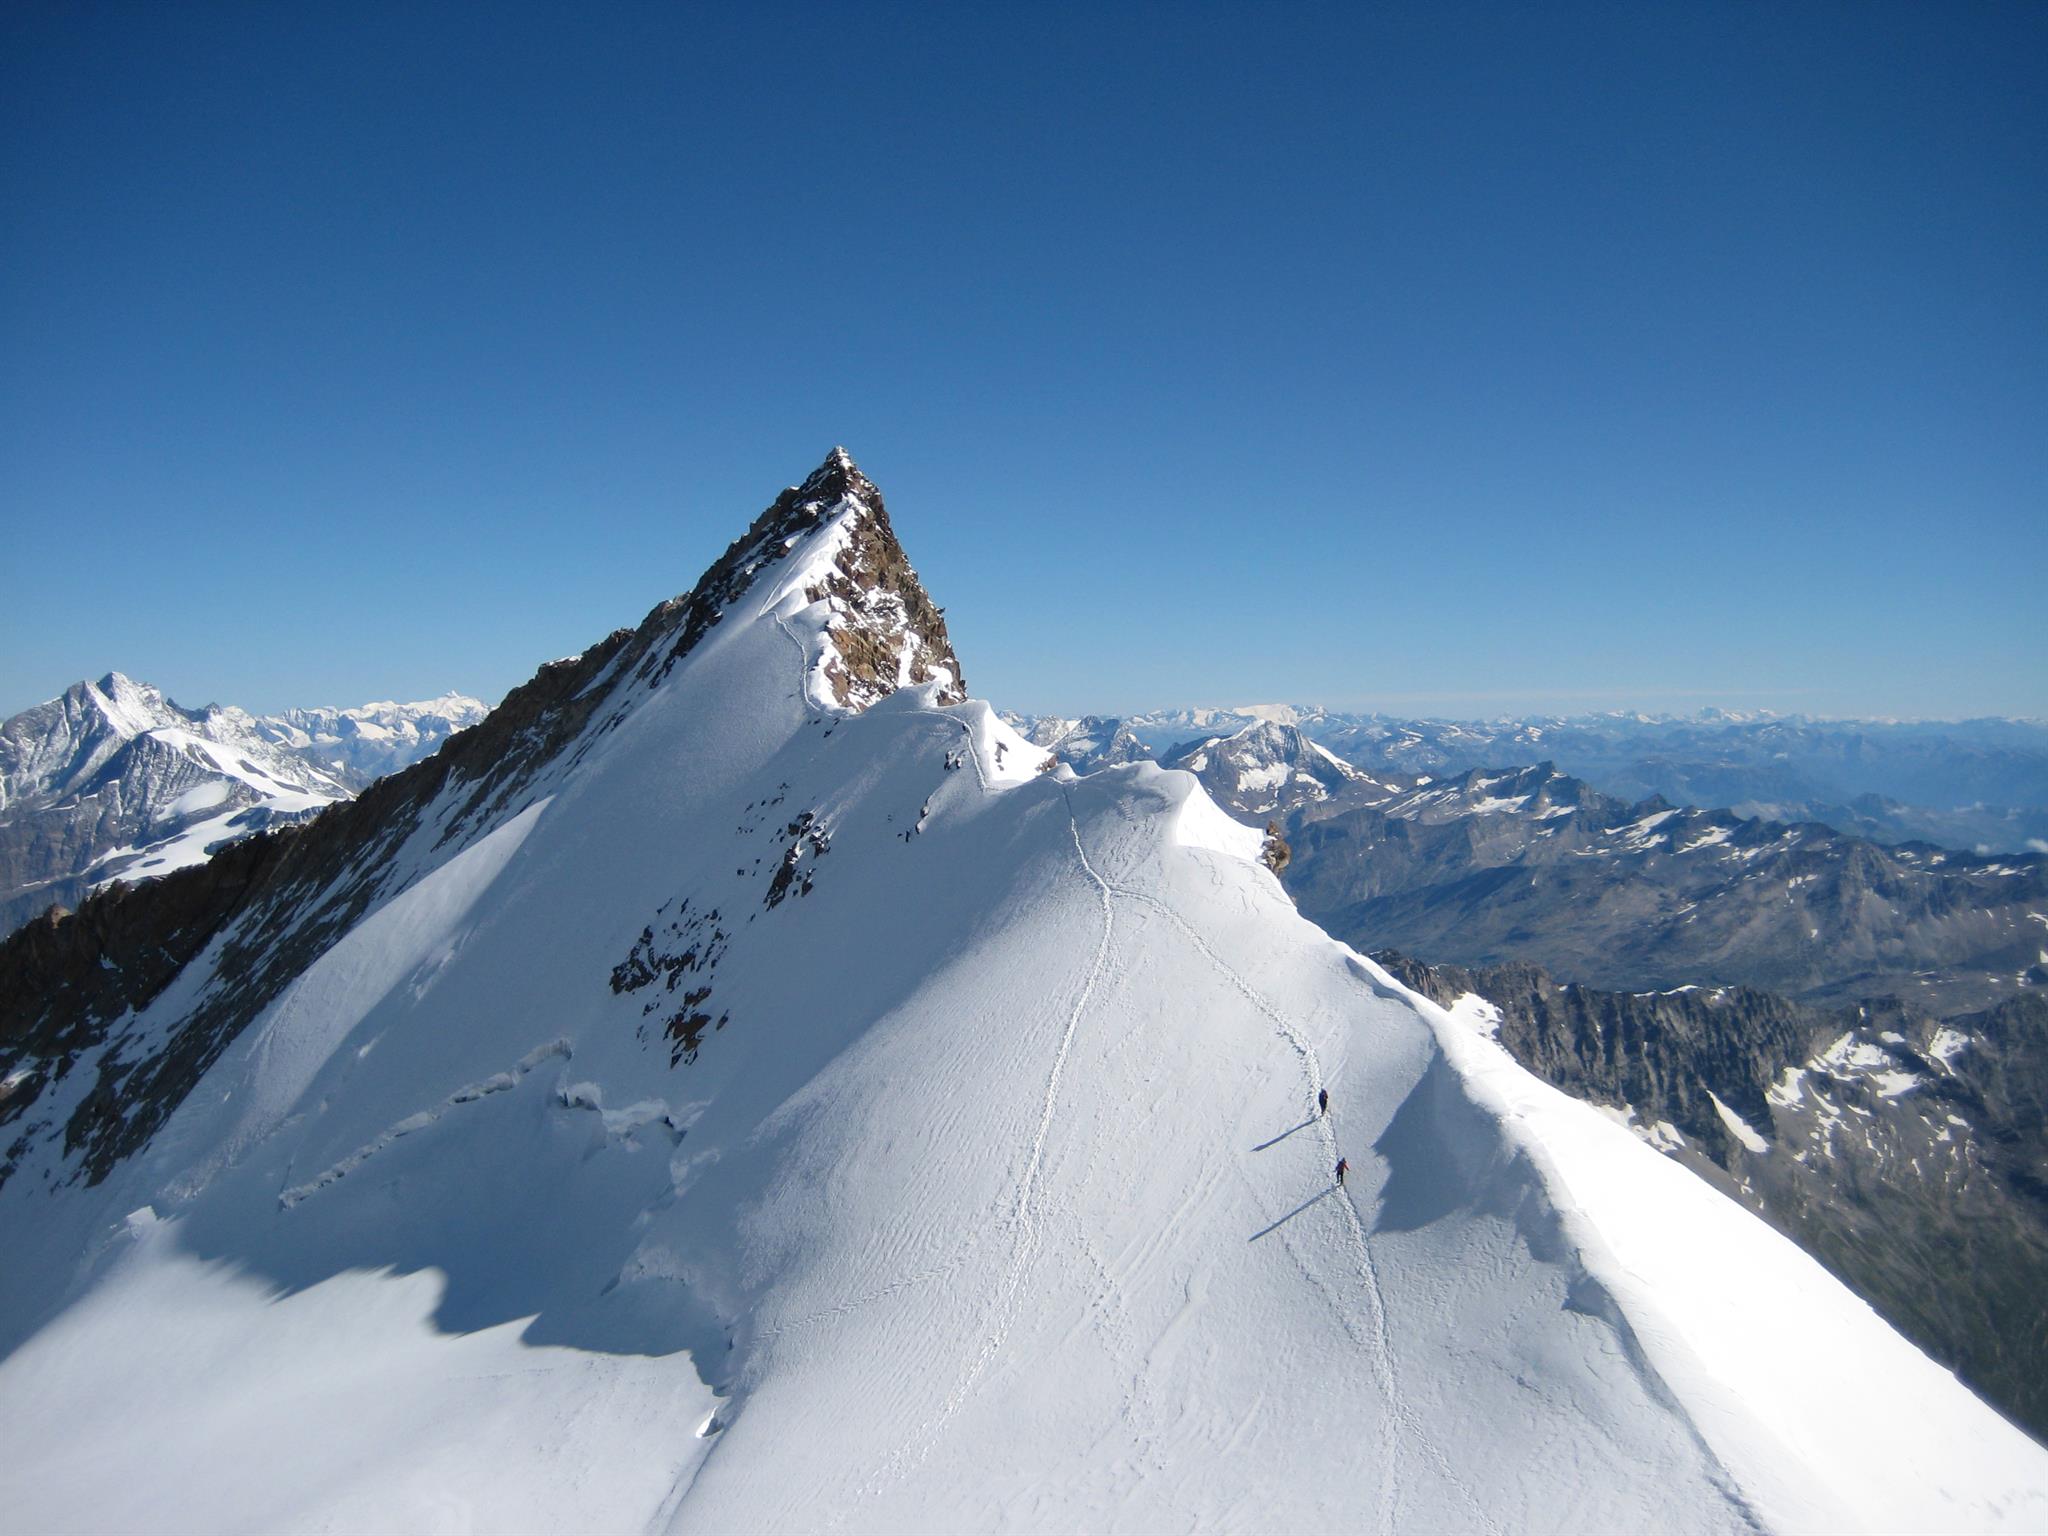 The highest mountain in europe. Норденд. The Alps are High than the Urals.